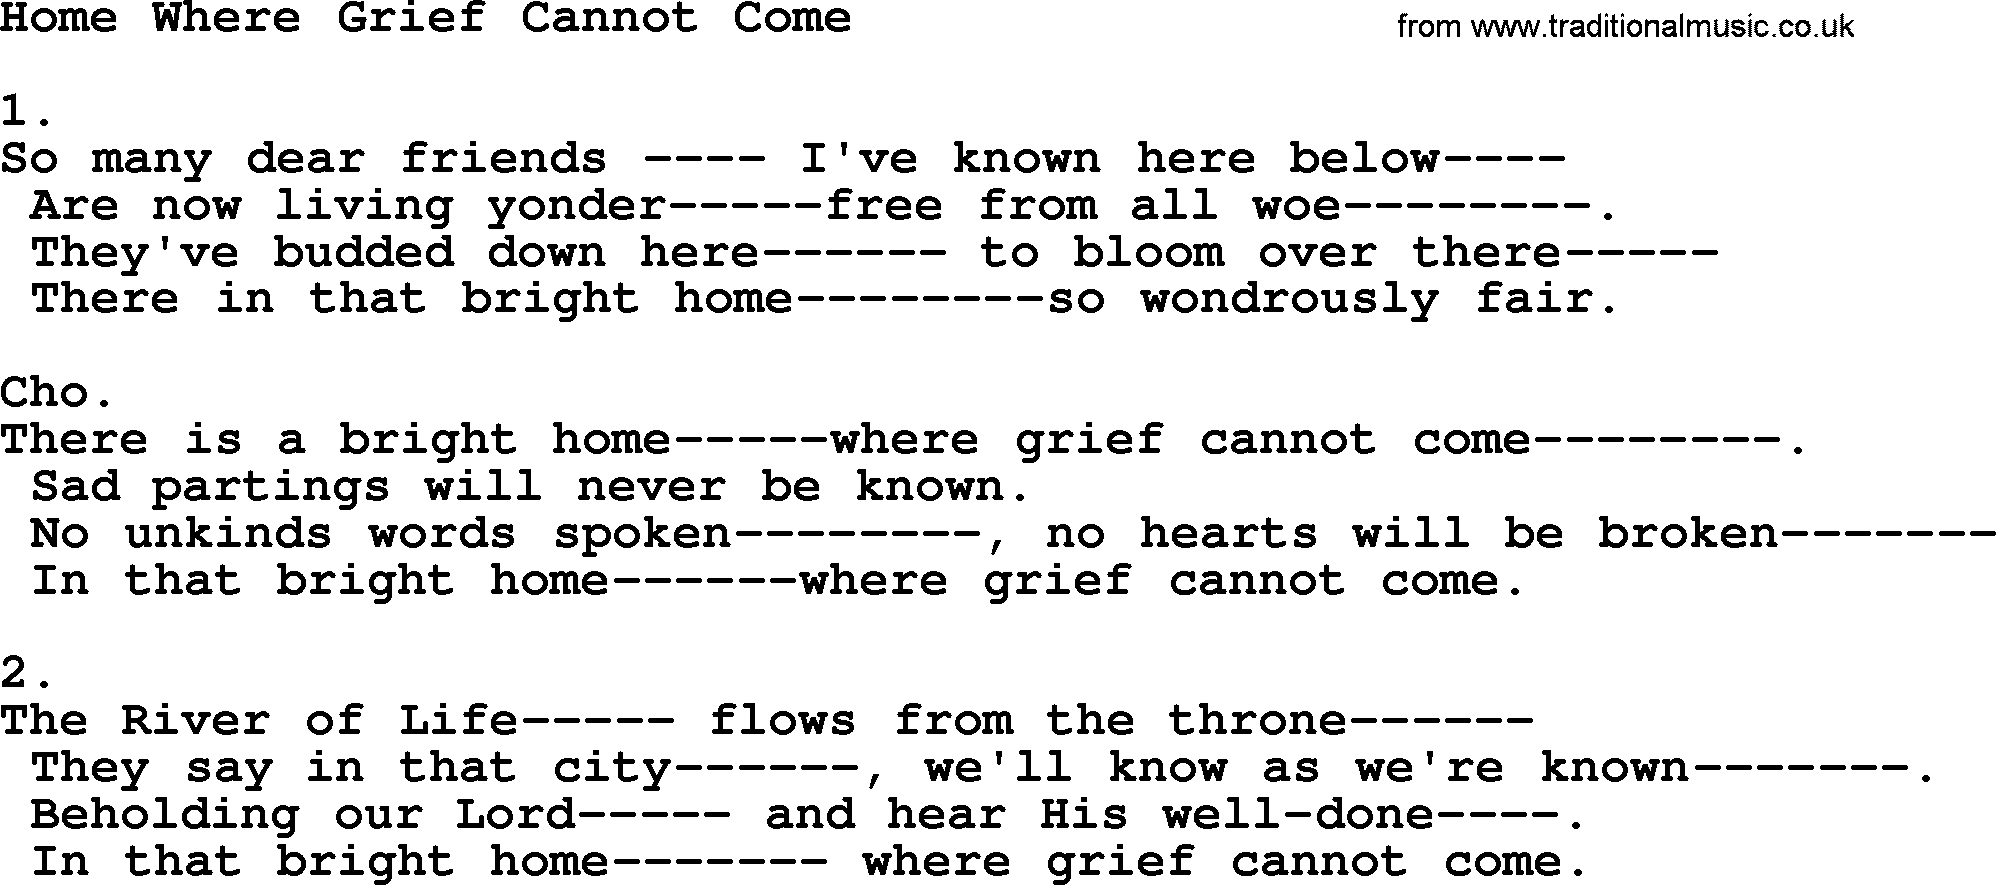 Apostolic & Pentecostal Hymns and Songs, Hymn: Home Where Grief Cannot Come lyrics and PDF